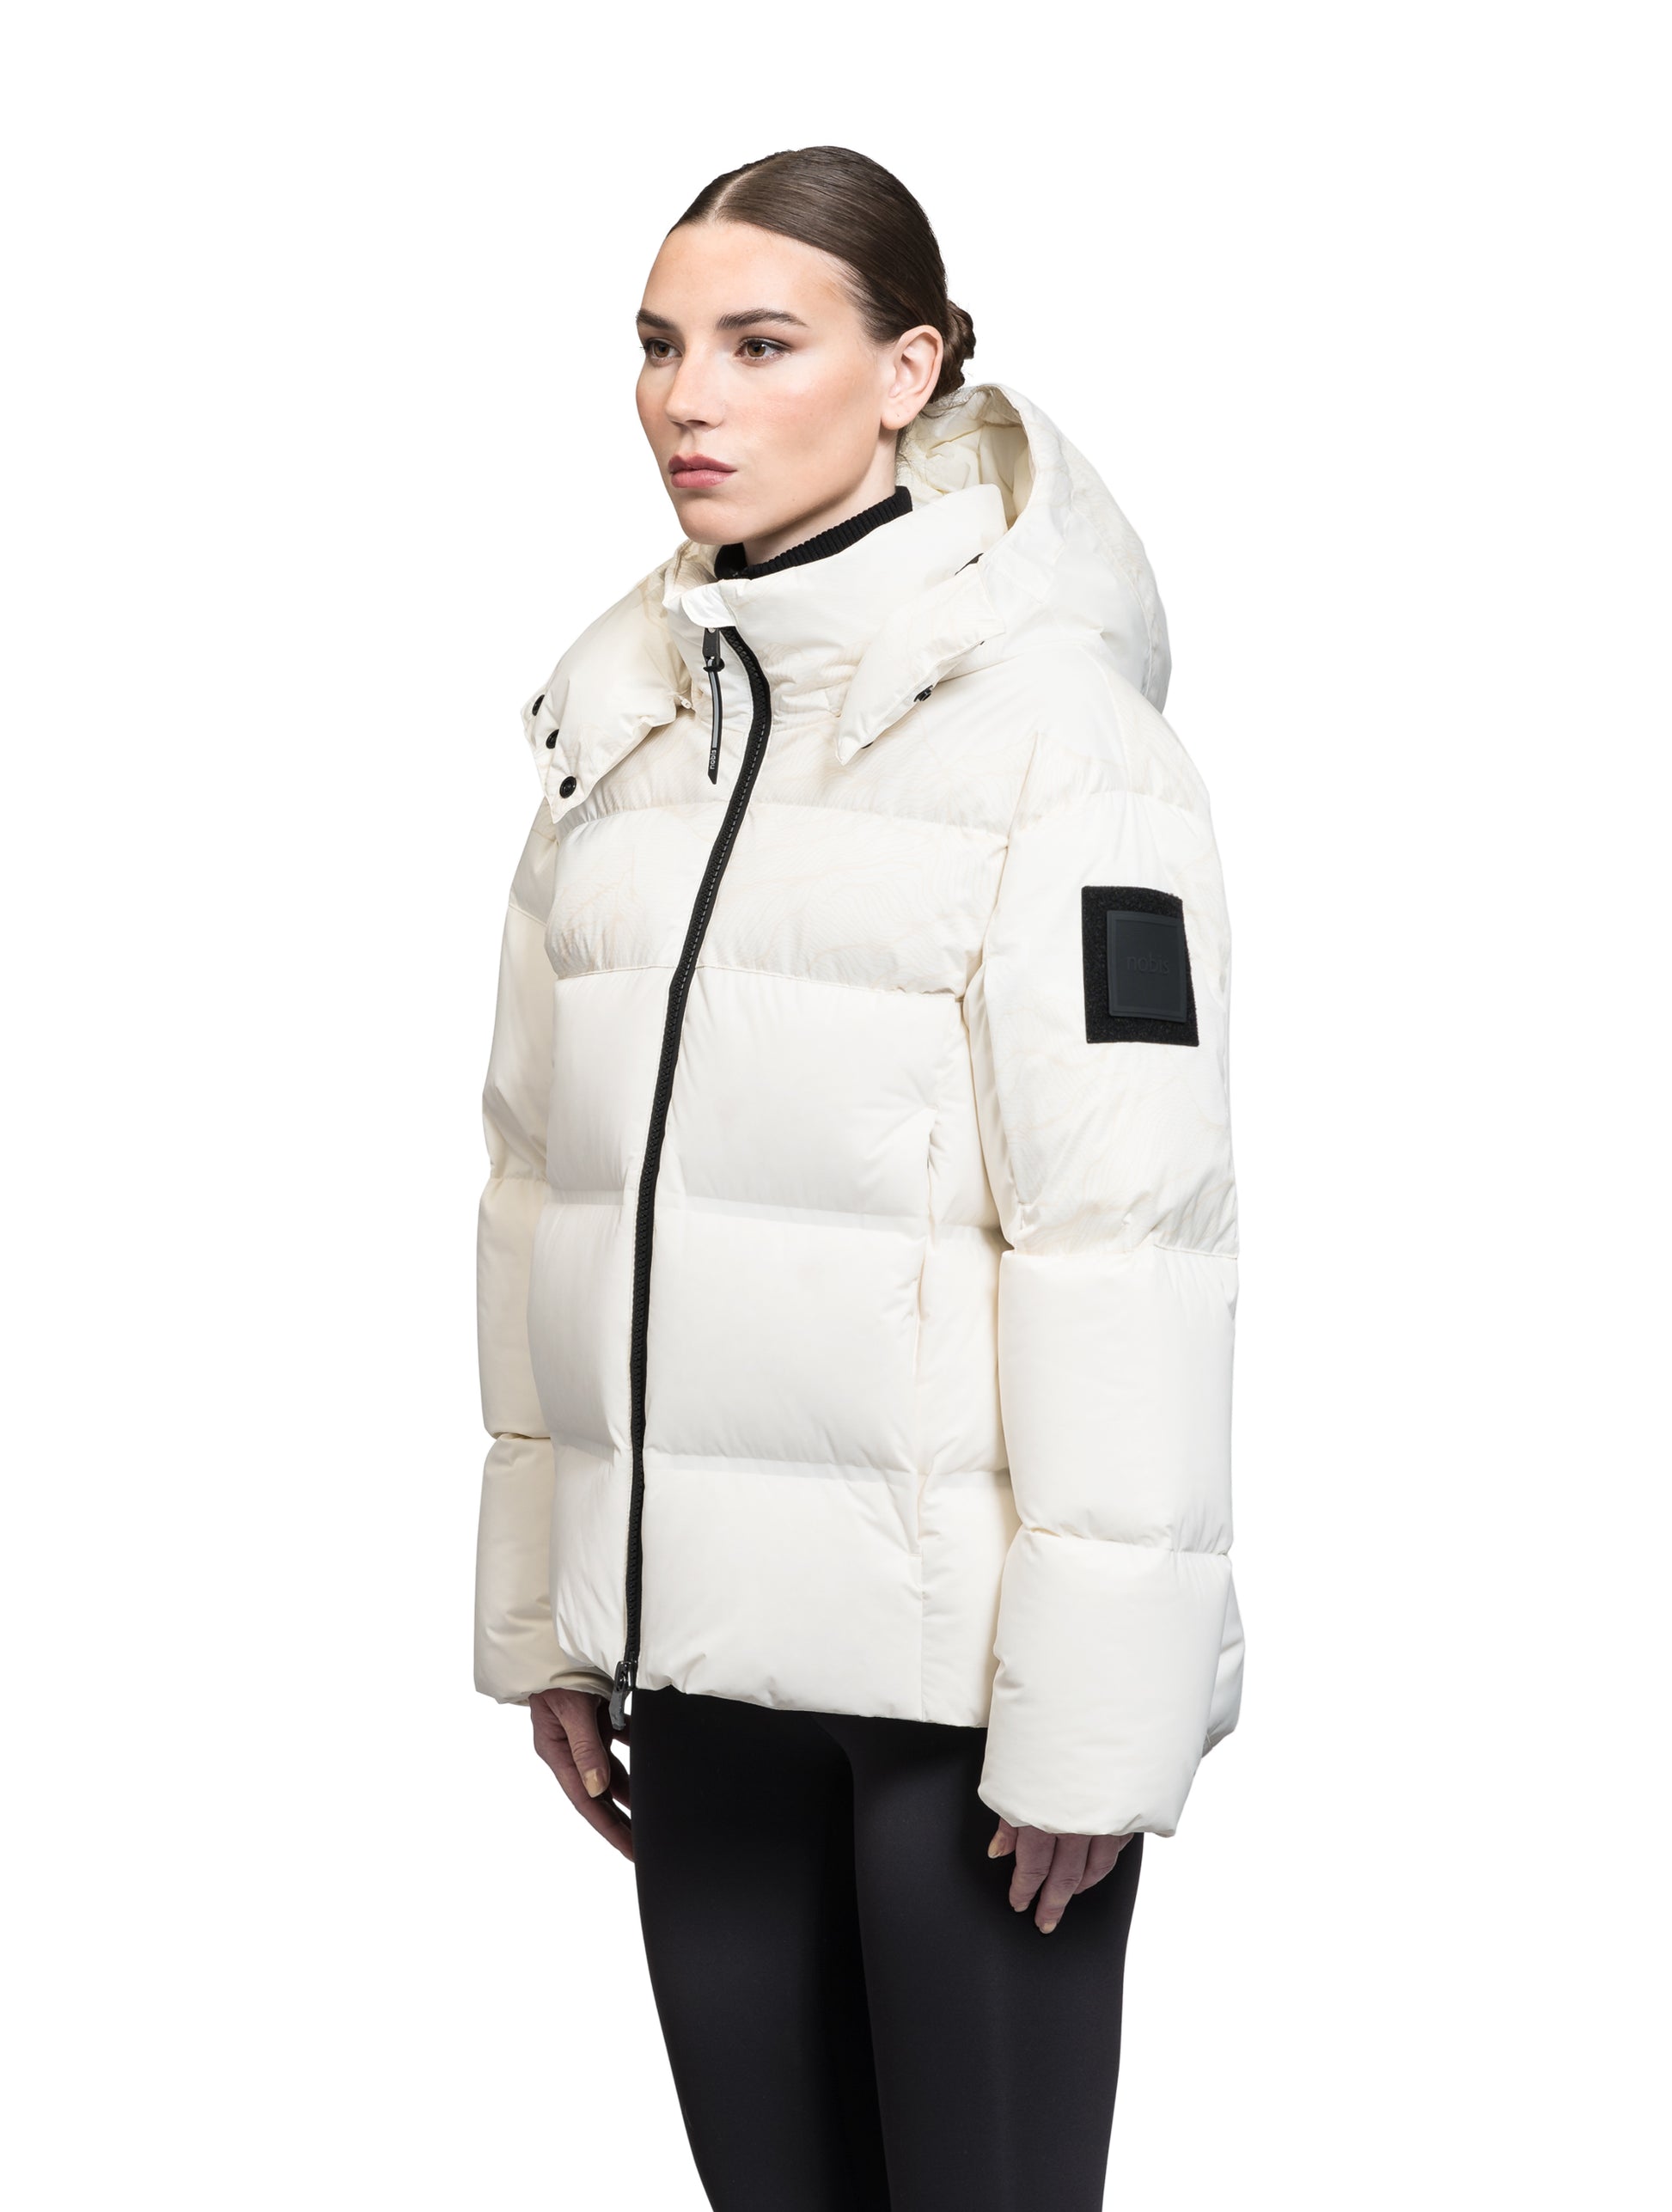 Una Ladies Performance Puffer in hip length, Technical Taffeta and Durable Stretch Ripstop fabrication, Premium Canadian White Duck Down insulation, removable down filled hood, centre front two-way zipper, and side-entry pockets at waist, in Wheat Desert